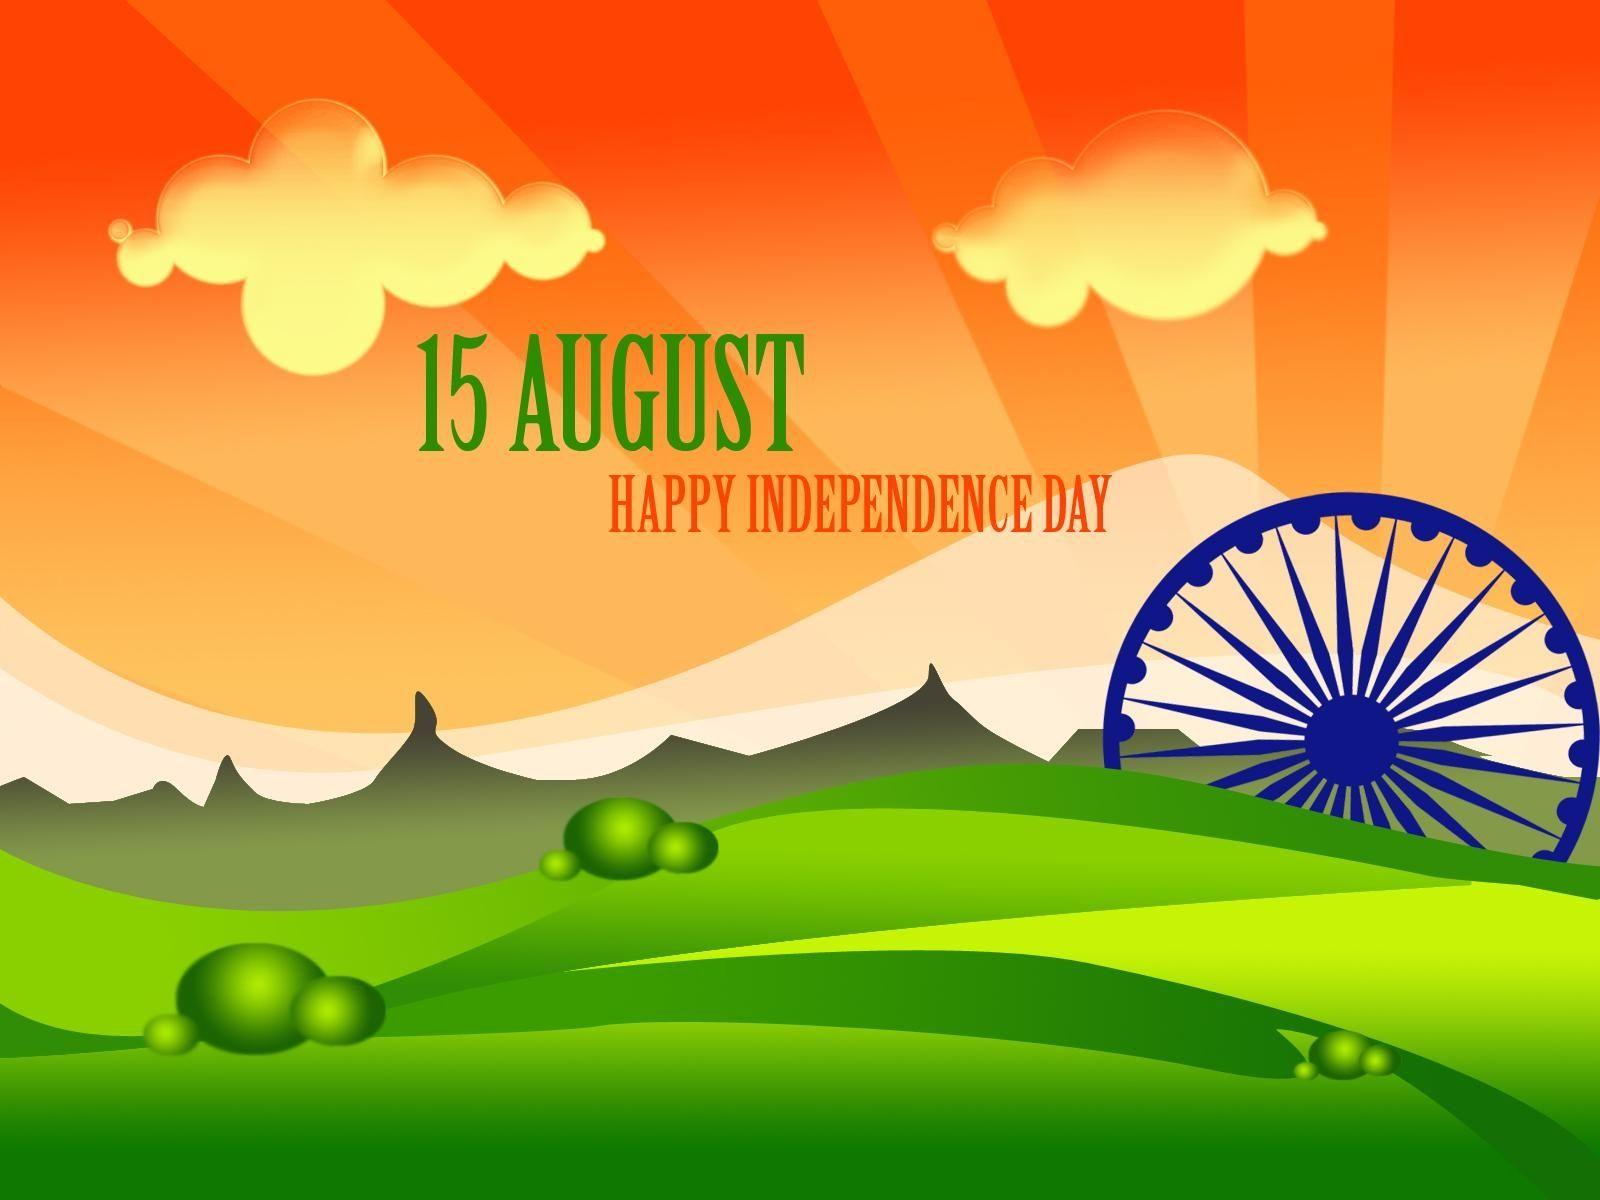 Independence Day Background Image